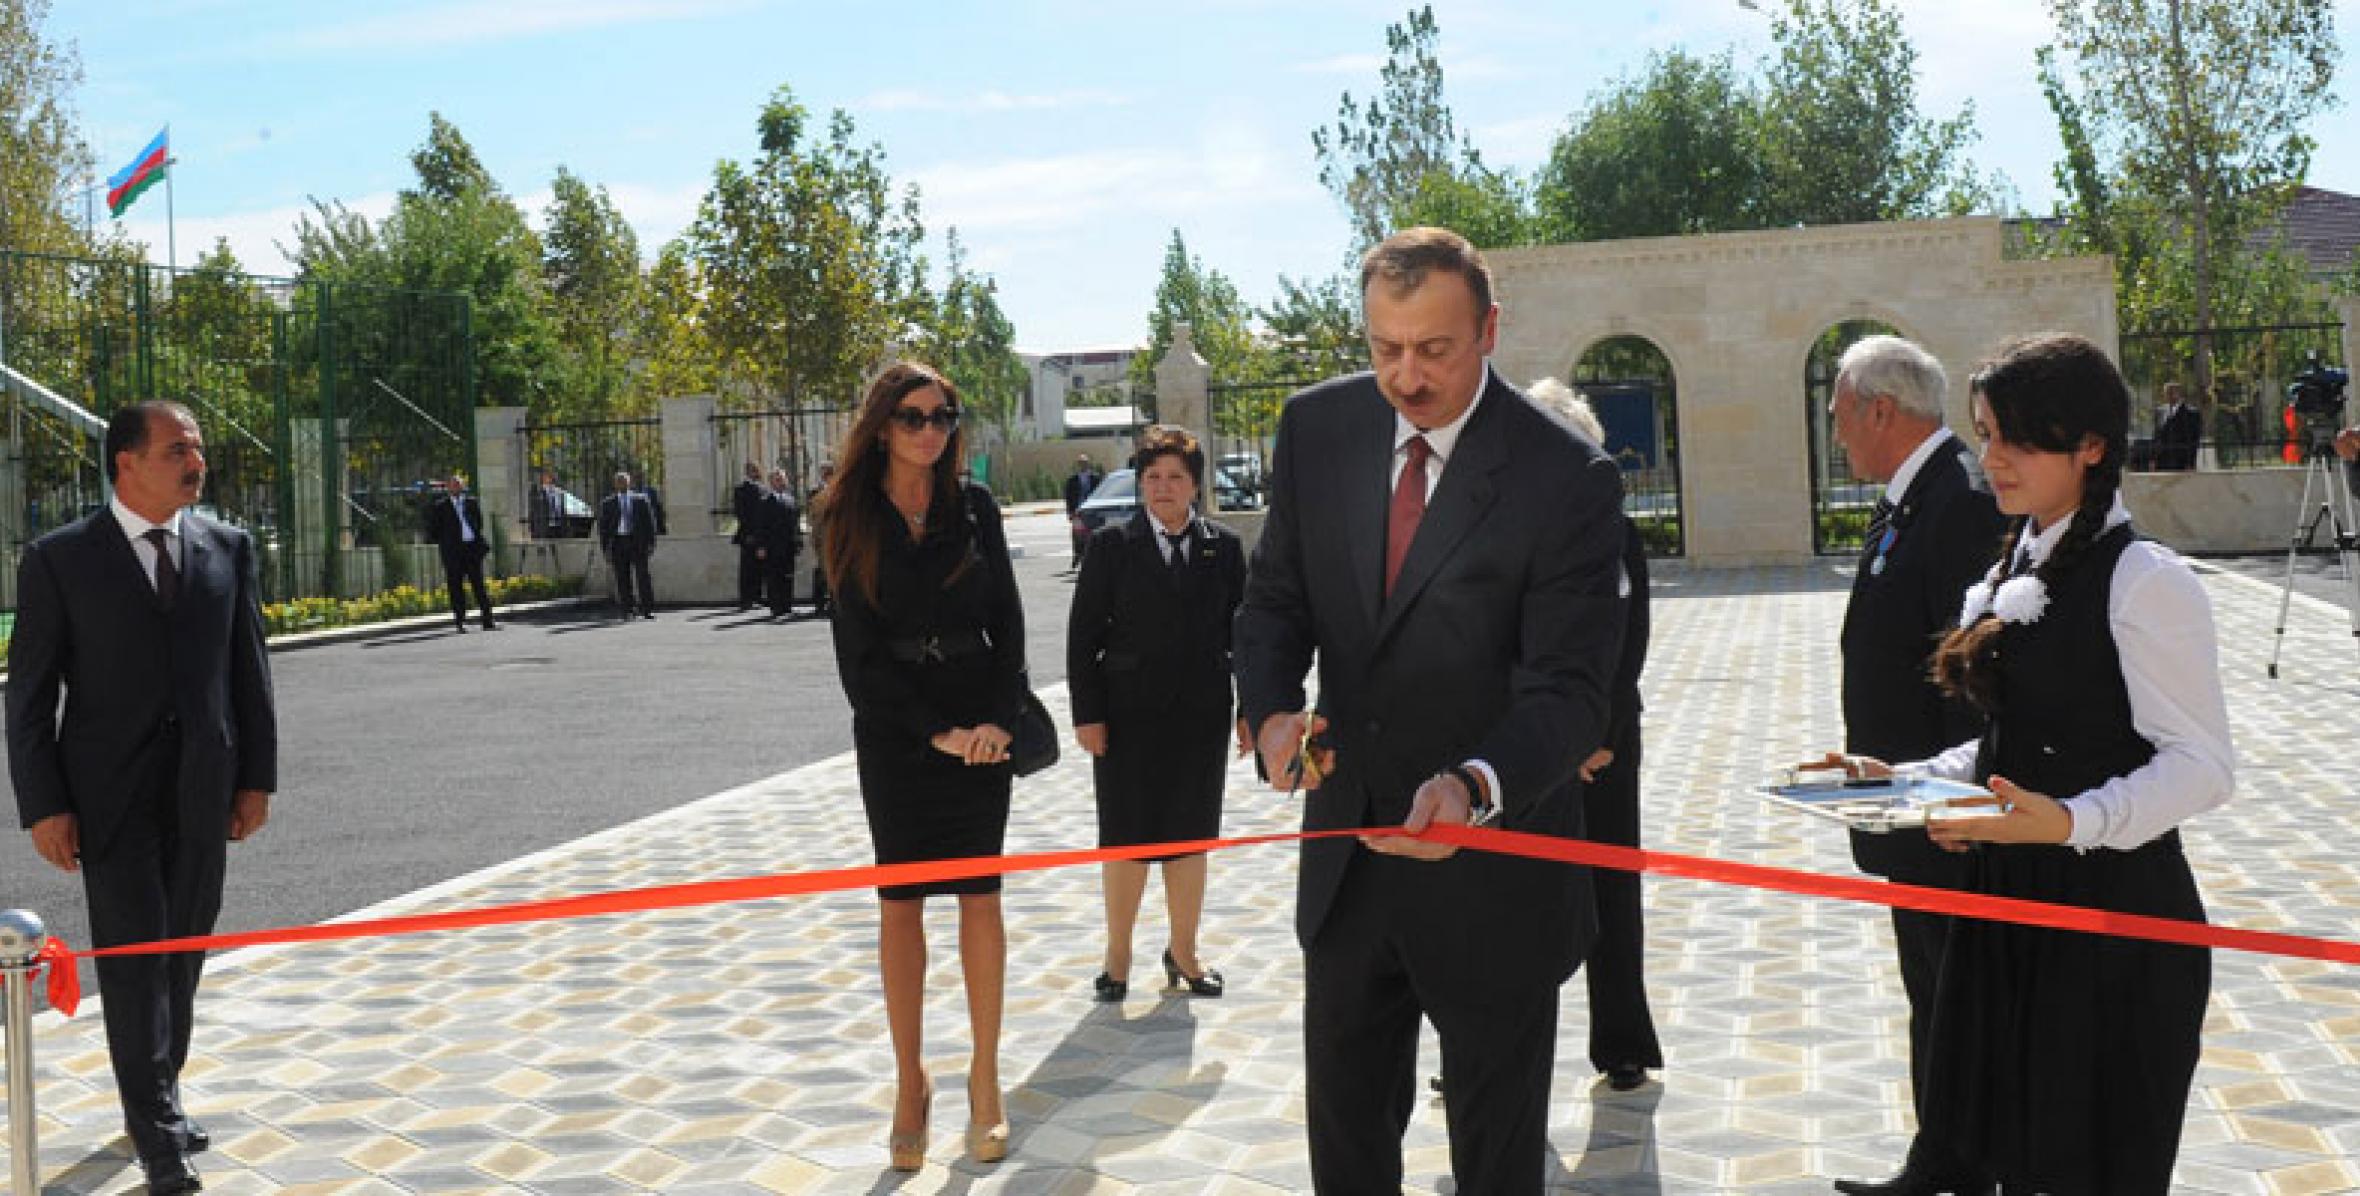 Ilham Aliyev attended the opening of a new building of school No 1 in Yevlakh